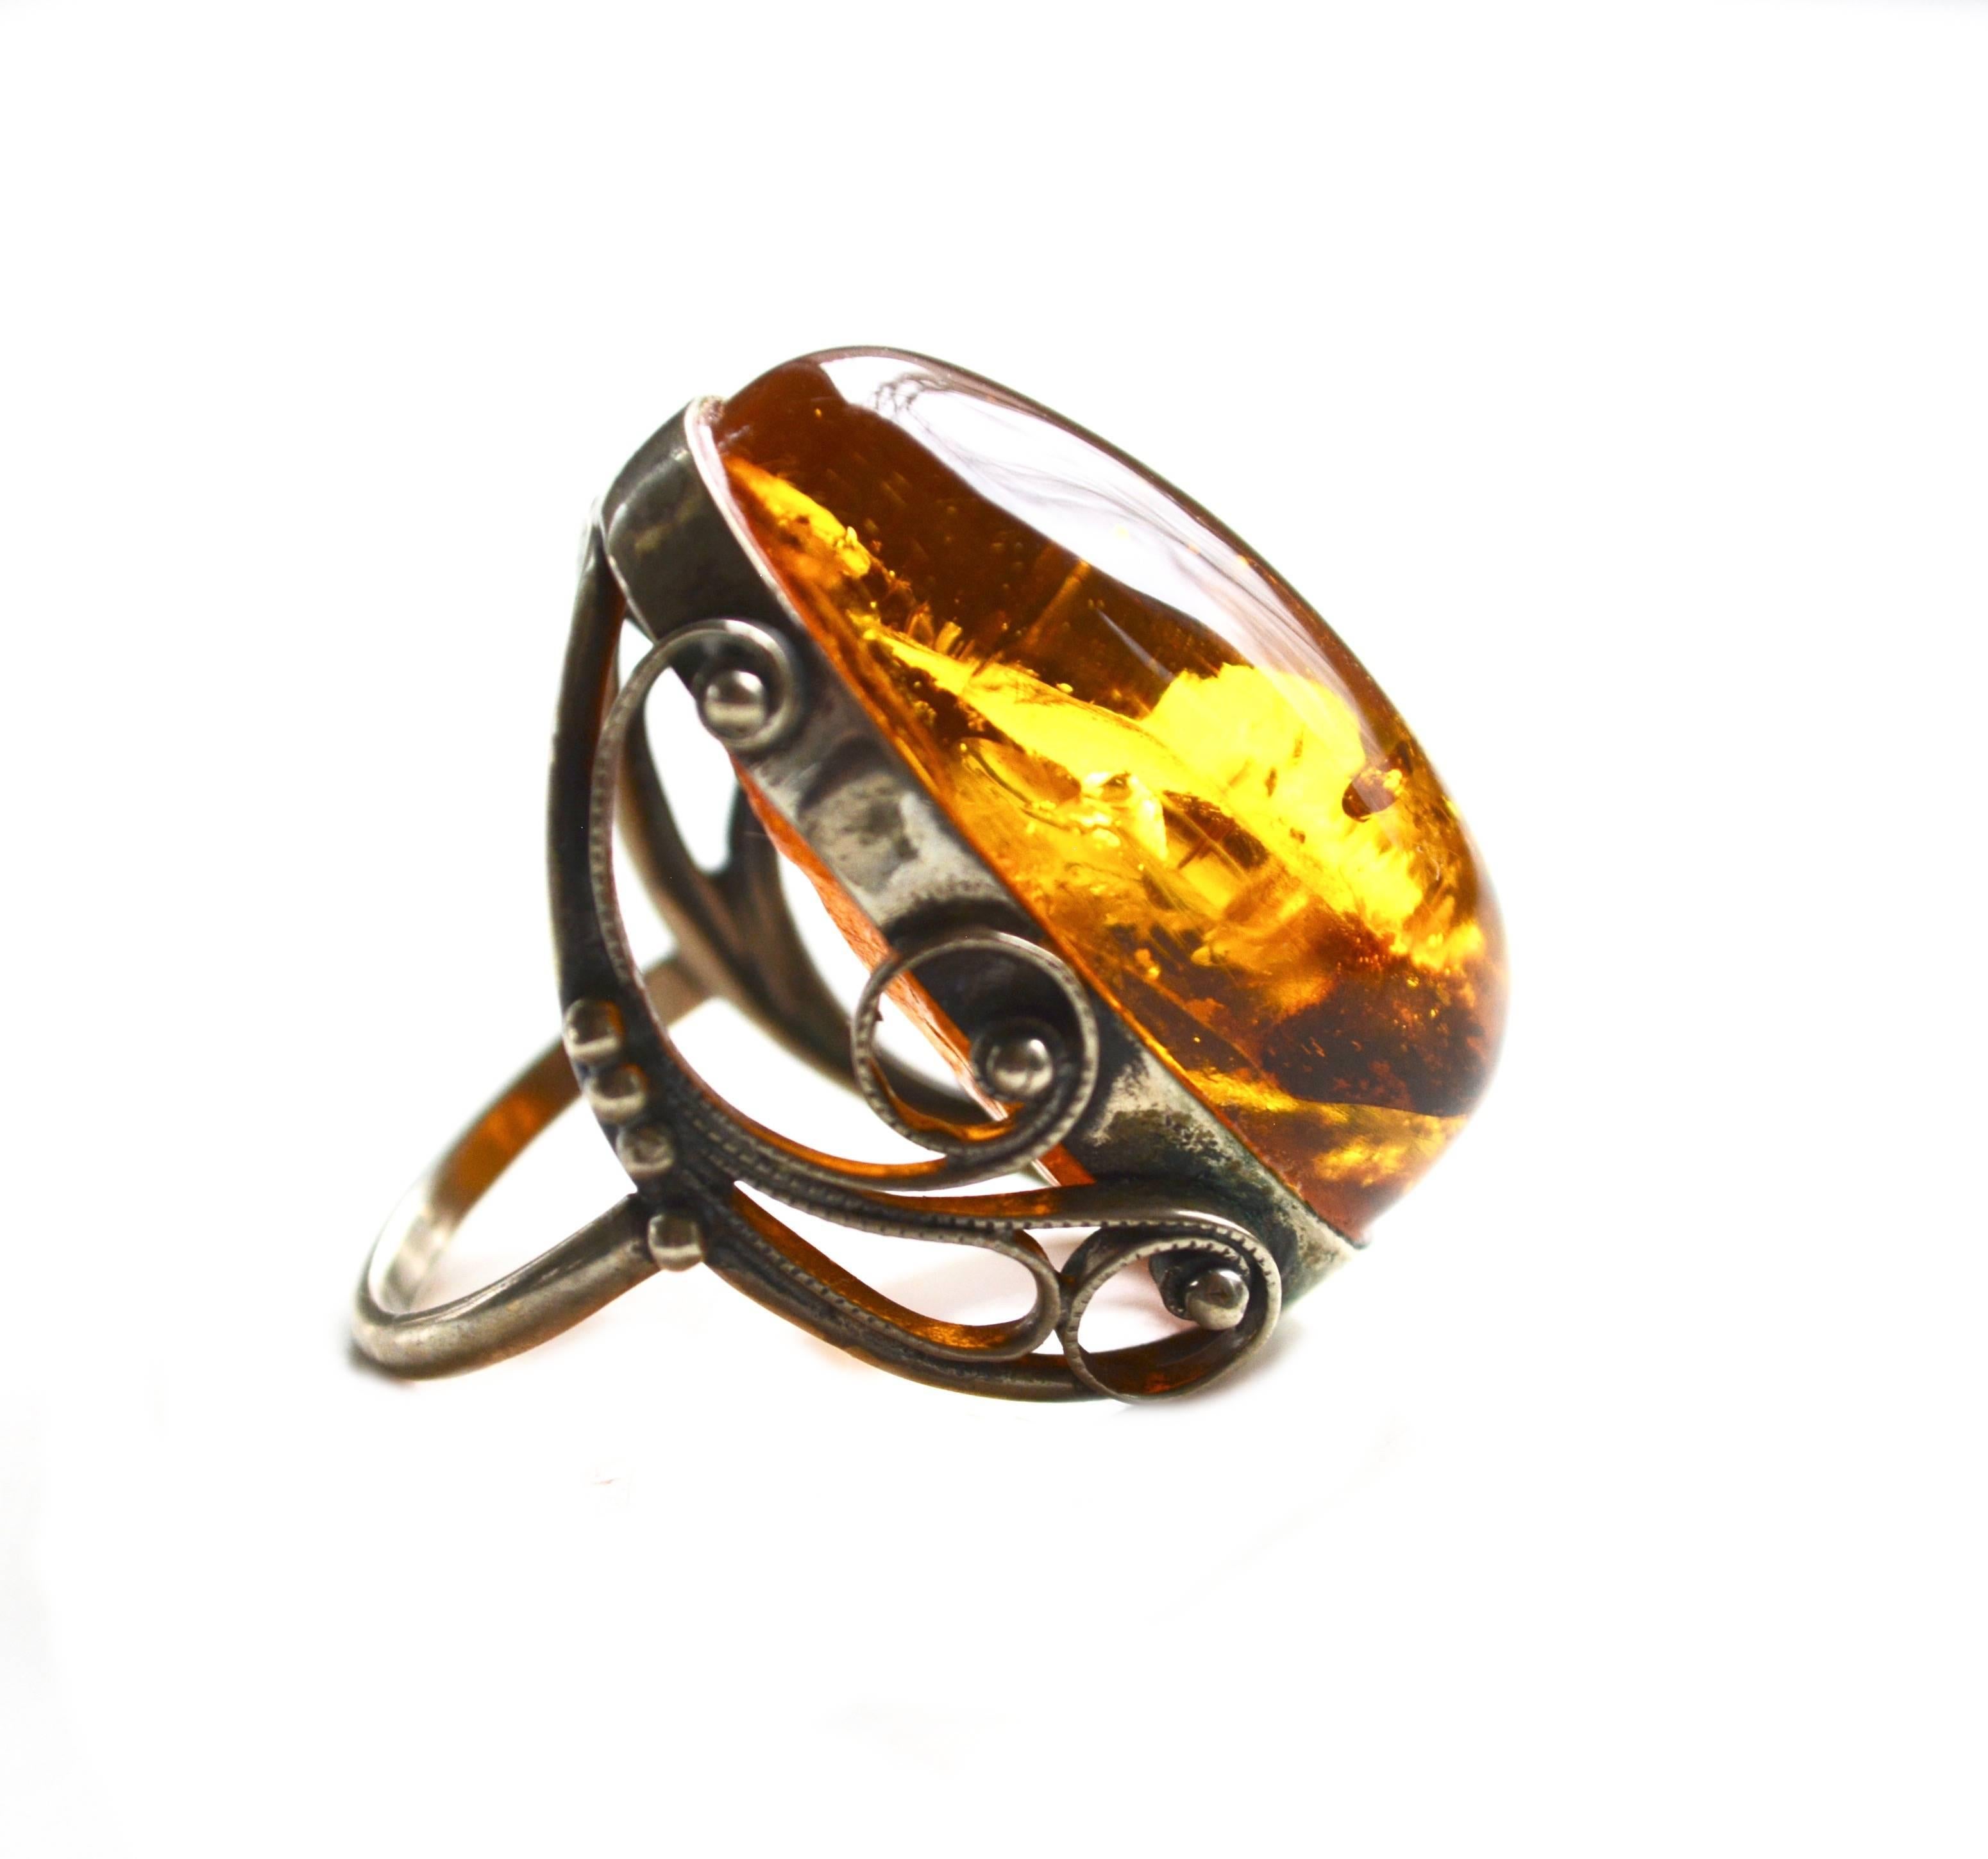 Oversized beautiful amber and sterling ring brought back from Latvia in the 1970s.  1.5" long. Size 7.5.